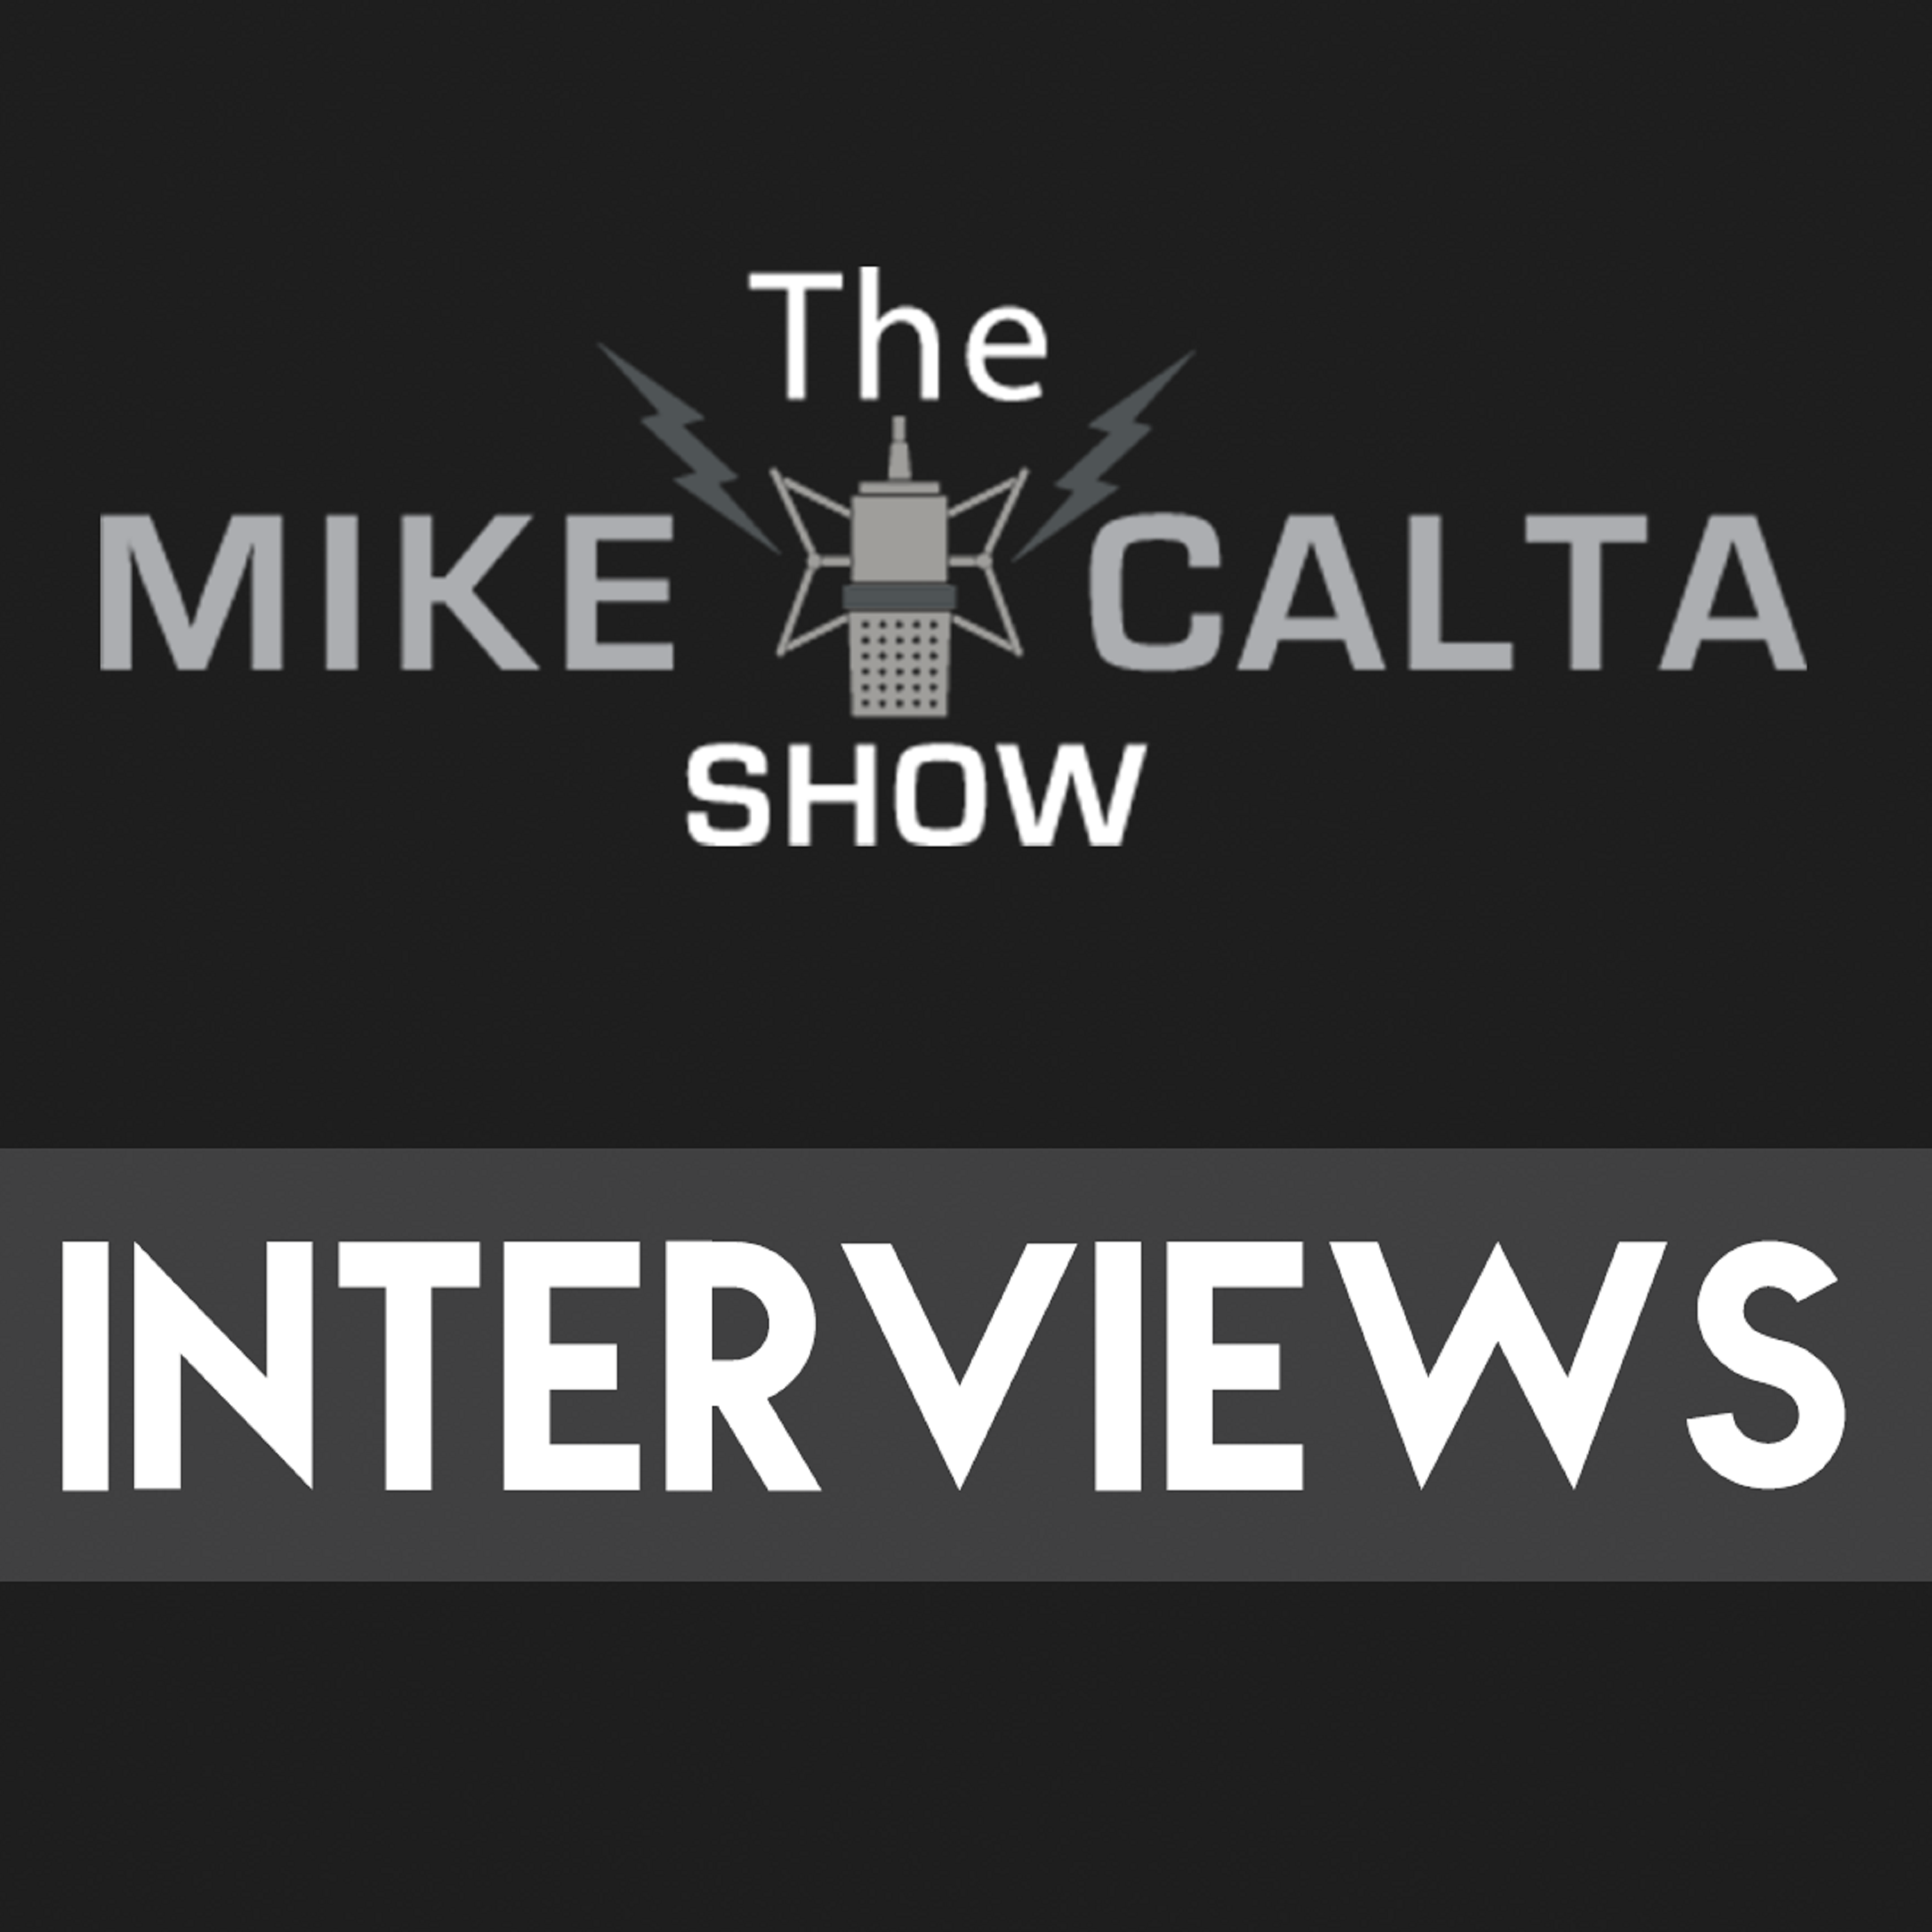 The Mike Calta Show Interviews